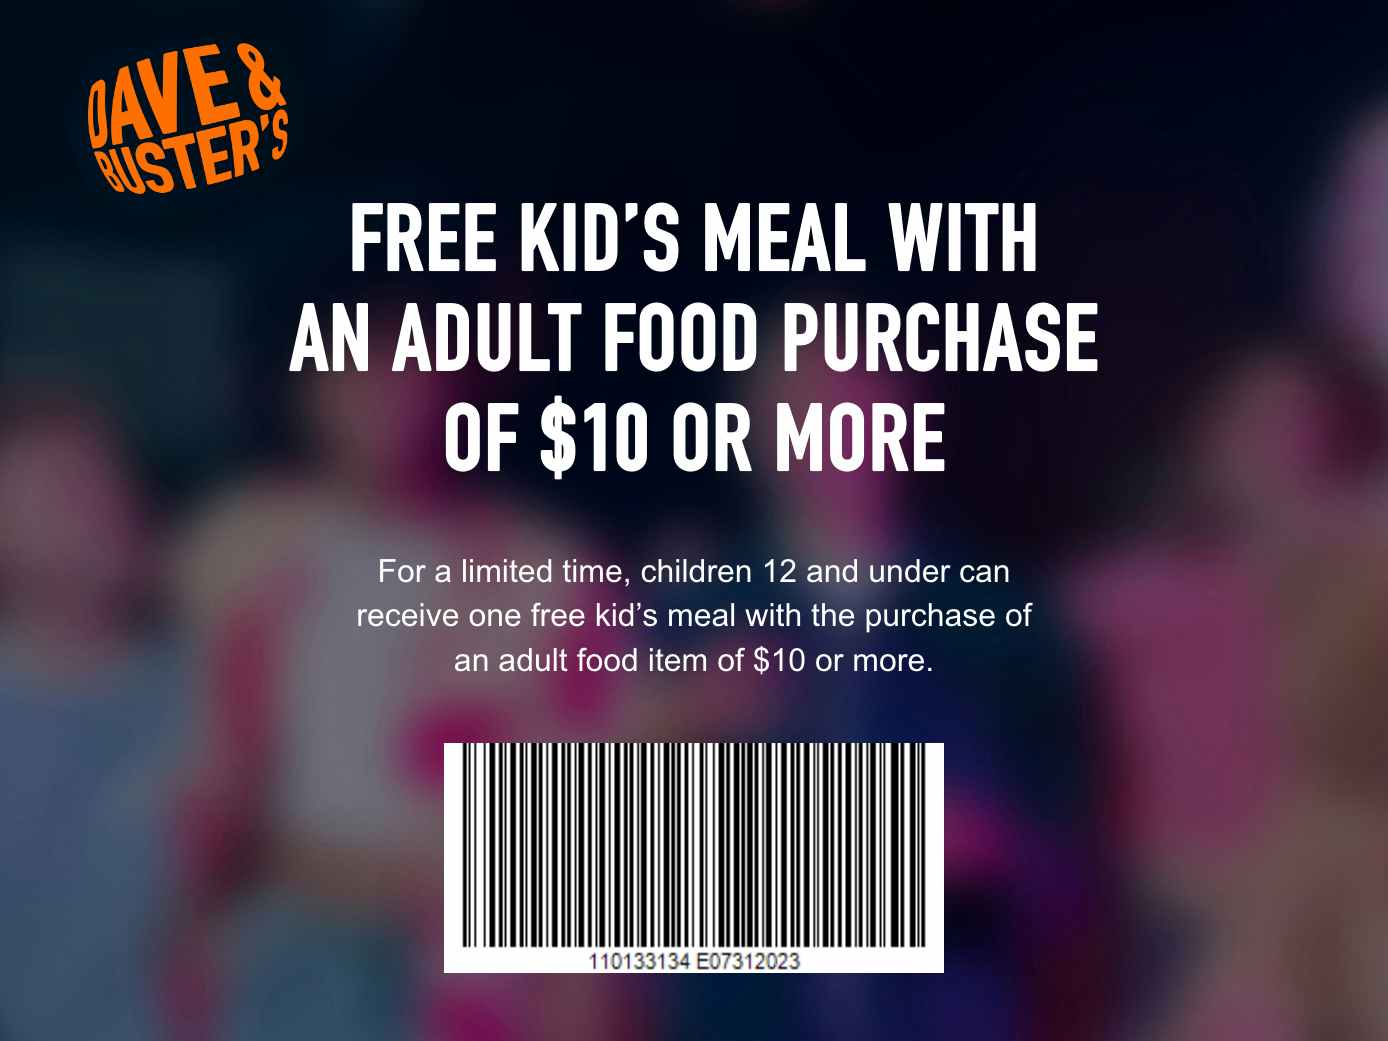 $10 FREE Game Play at Dave & Buster's